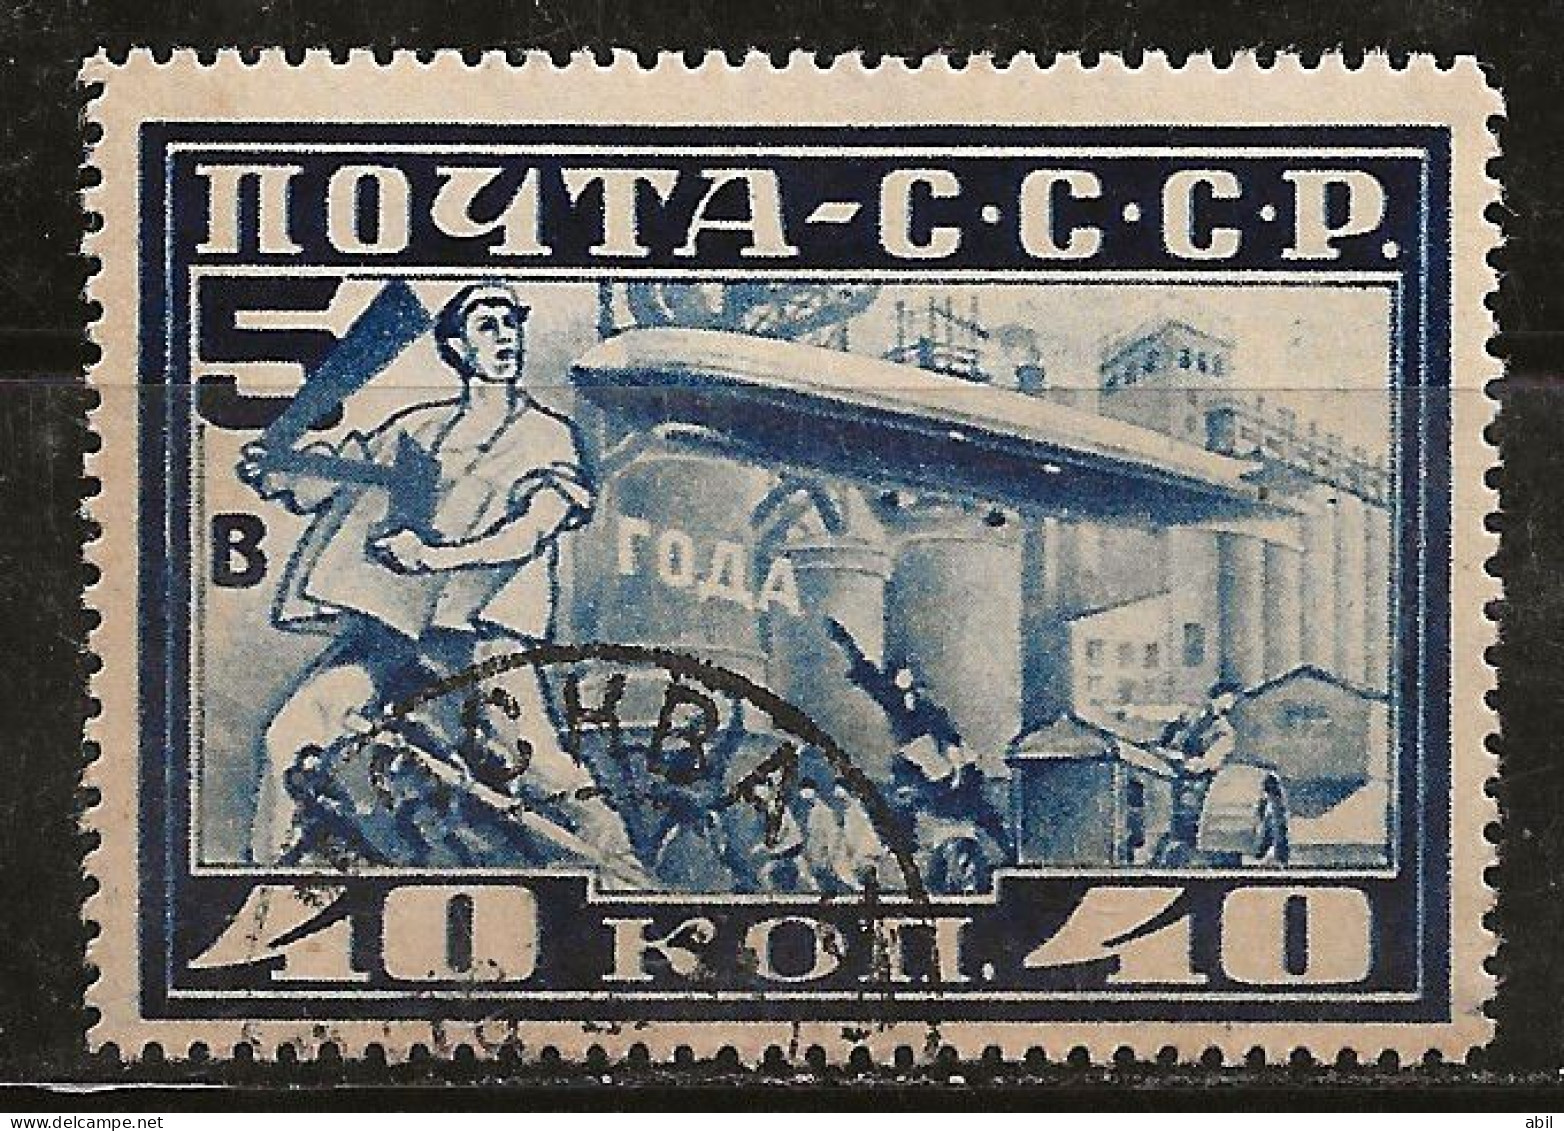 Russie 1927 N° Y&T :  PA 20 (dent.12) Obl. - Used Stamps